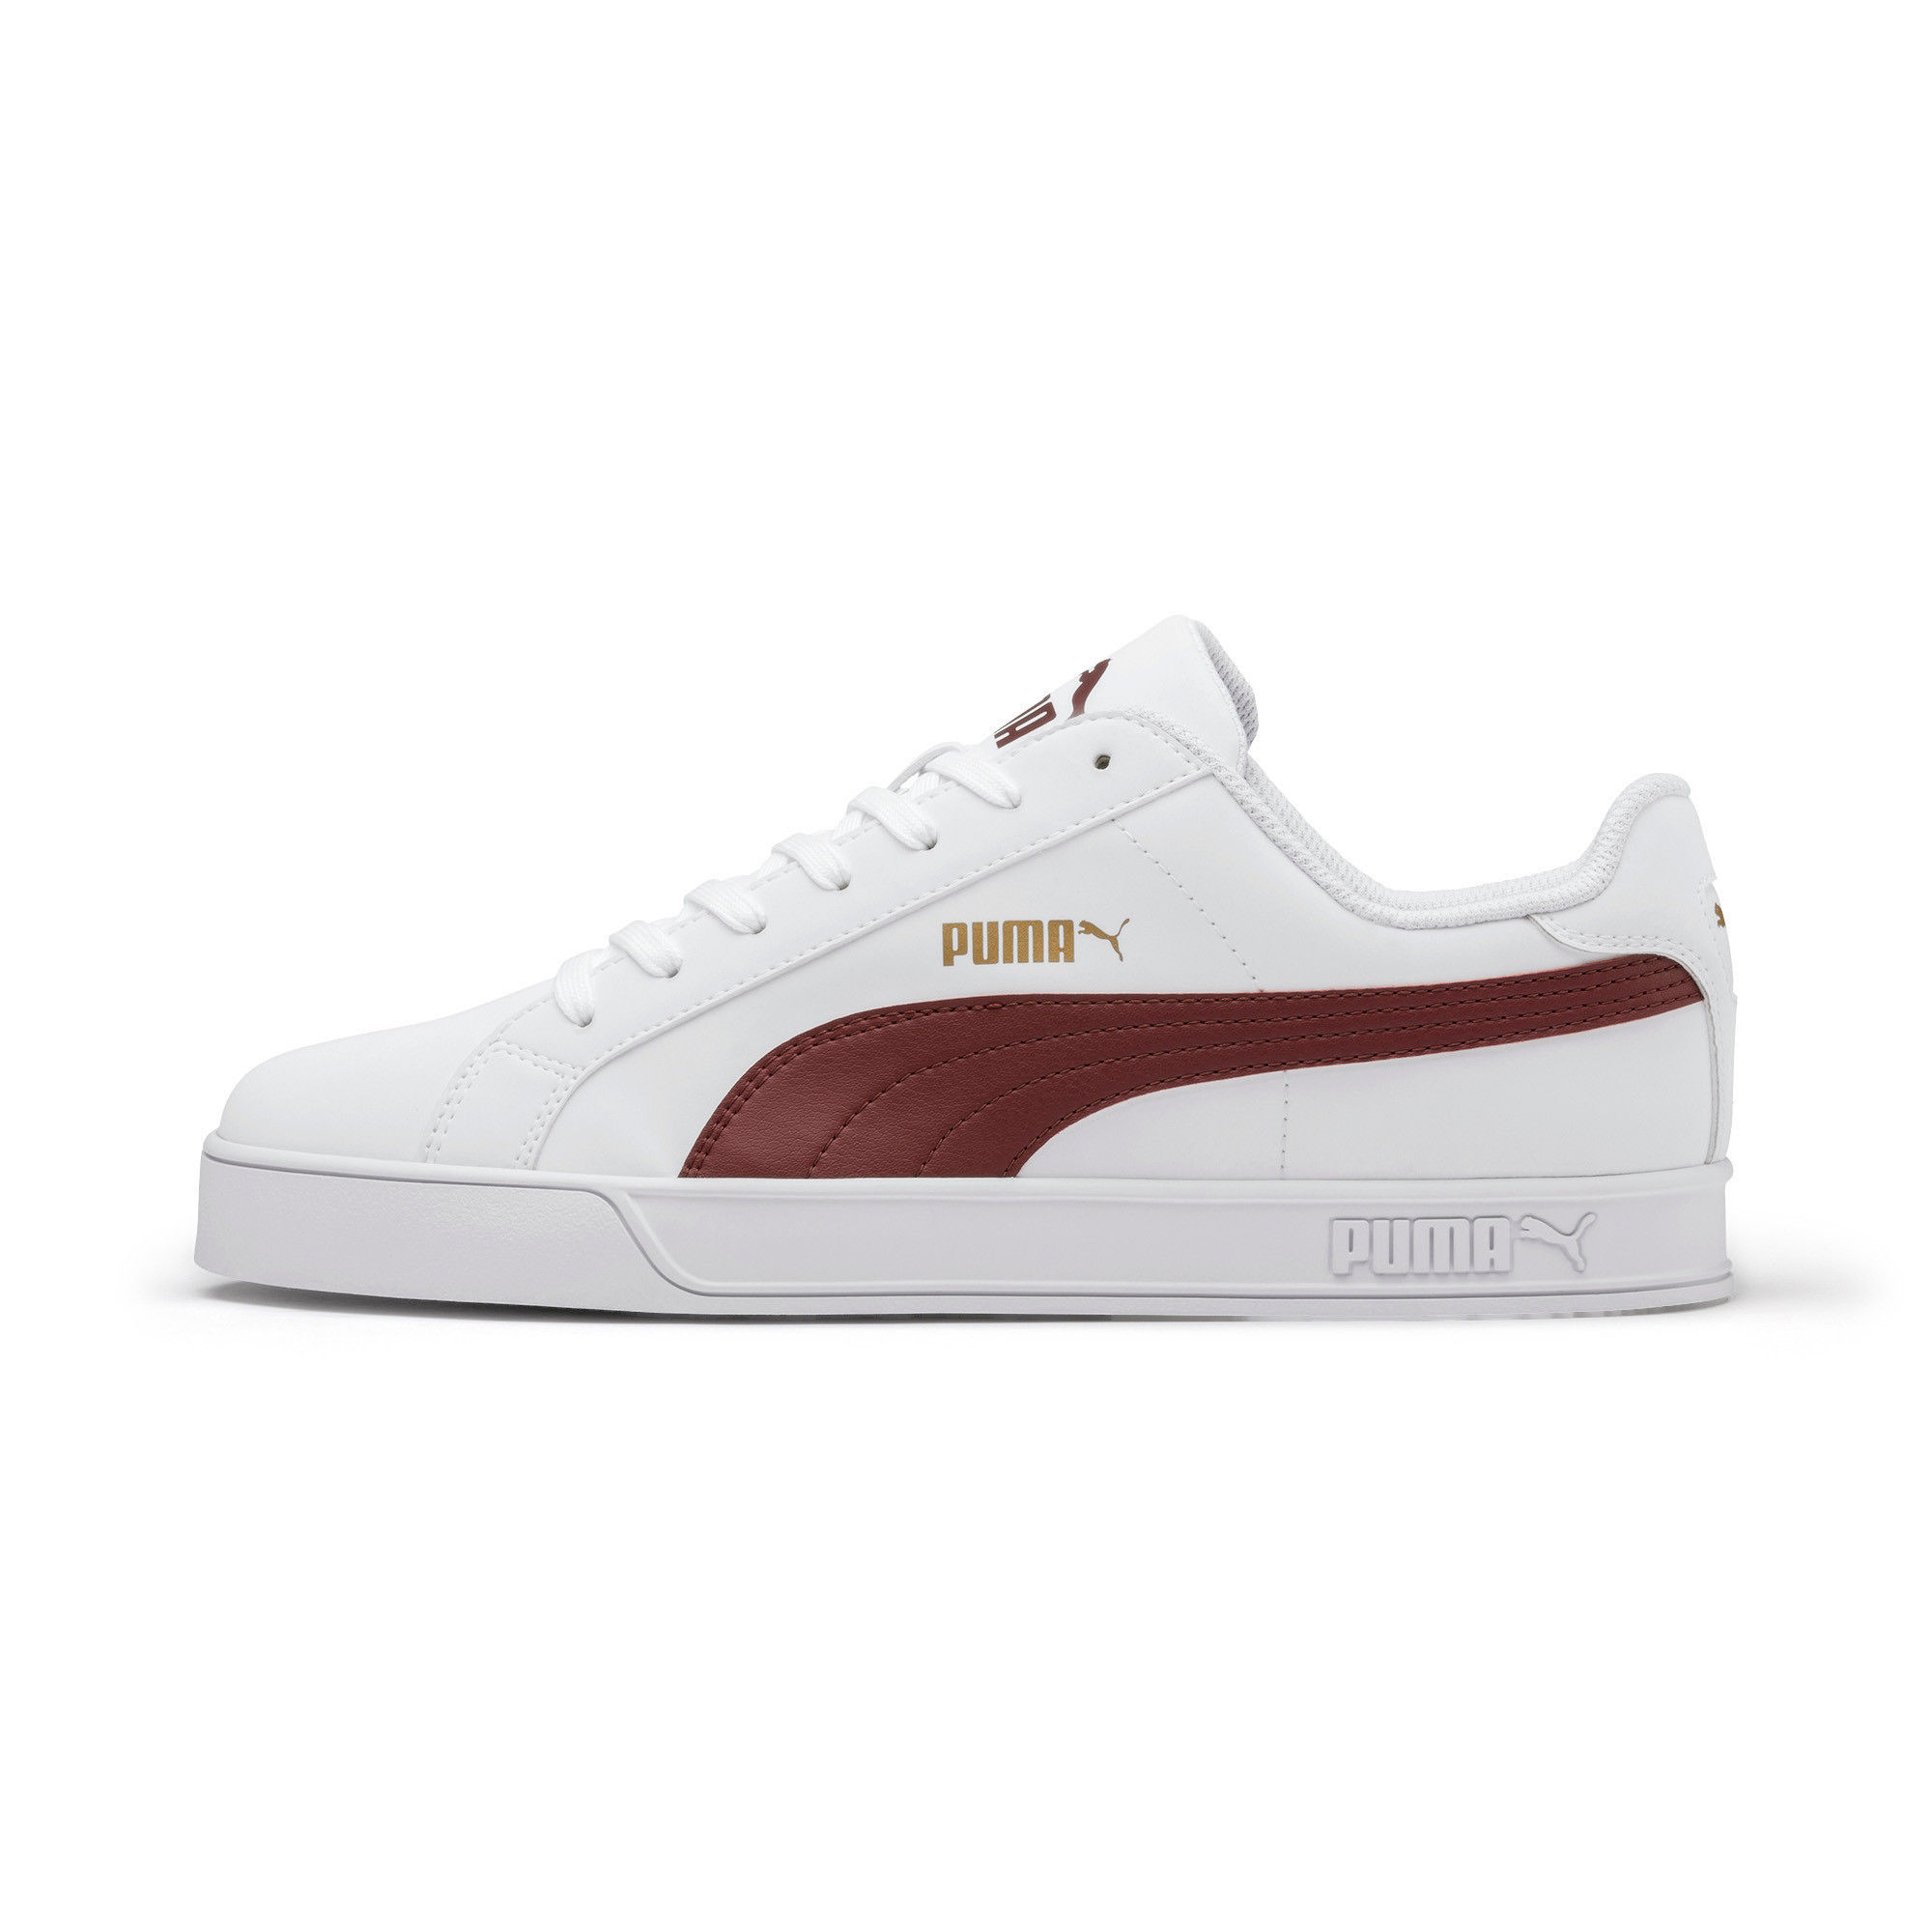 Buy Mayze Crashed Sneakers Women's Footwear from Puma. Find Puma fashion &  more at DrJays.com